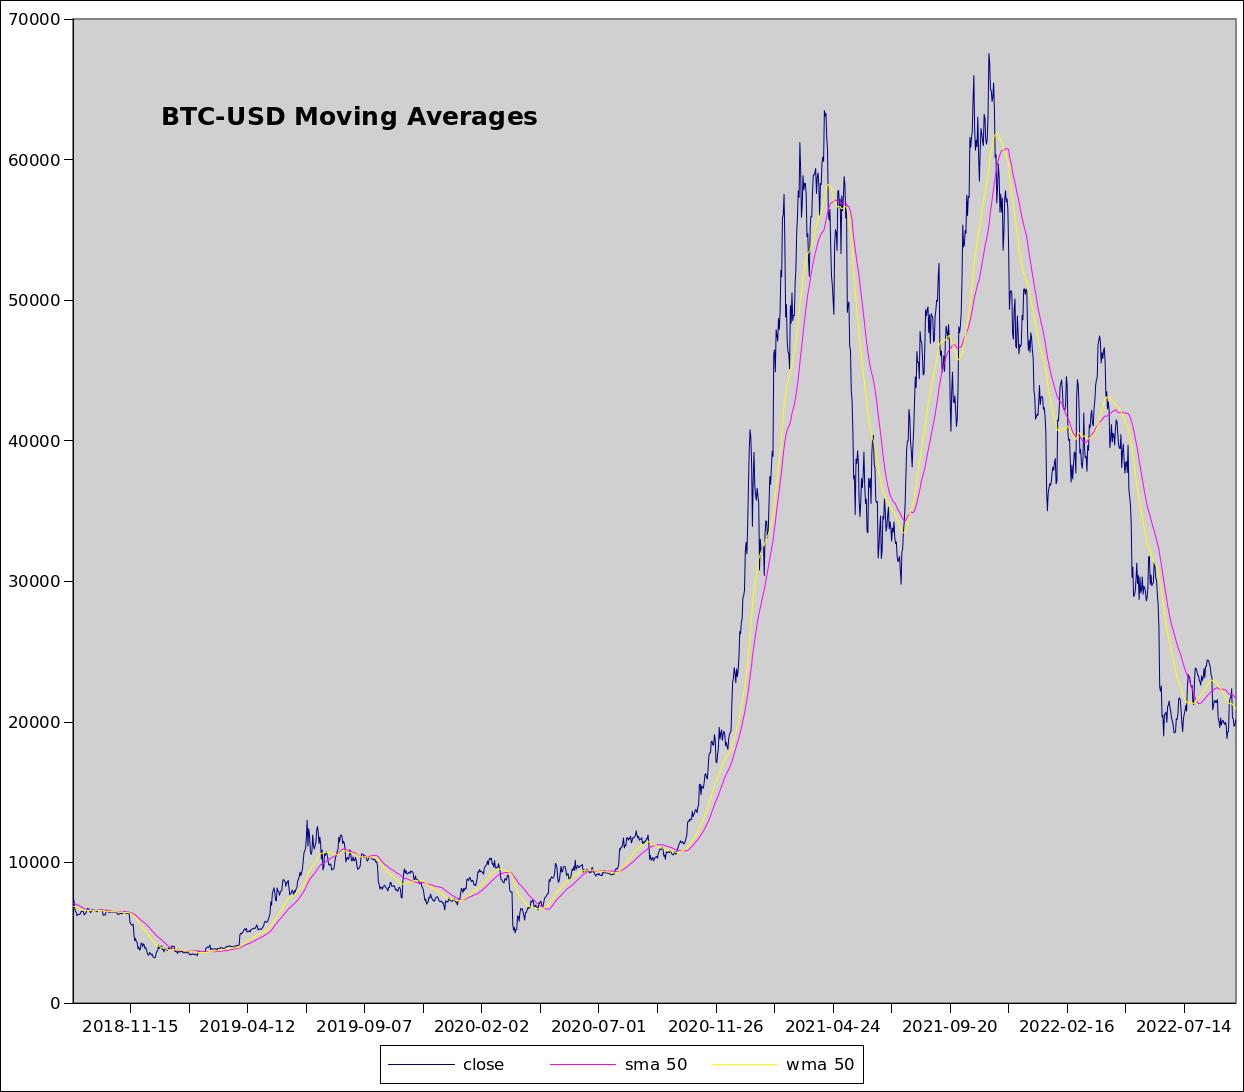 Price trend forecast chart of the BTC-USD based on technical analysis with lagging SMA and Weighted SMA 50.